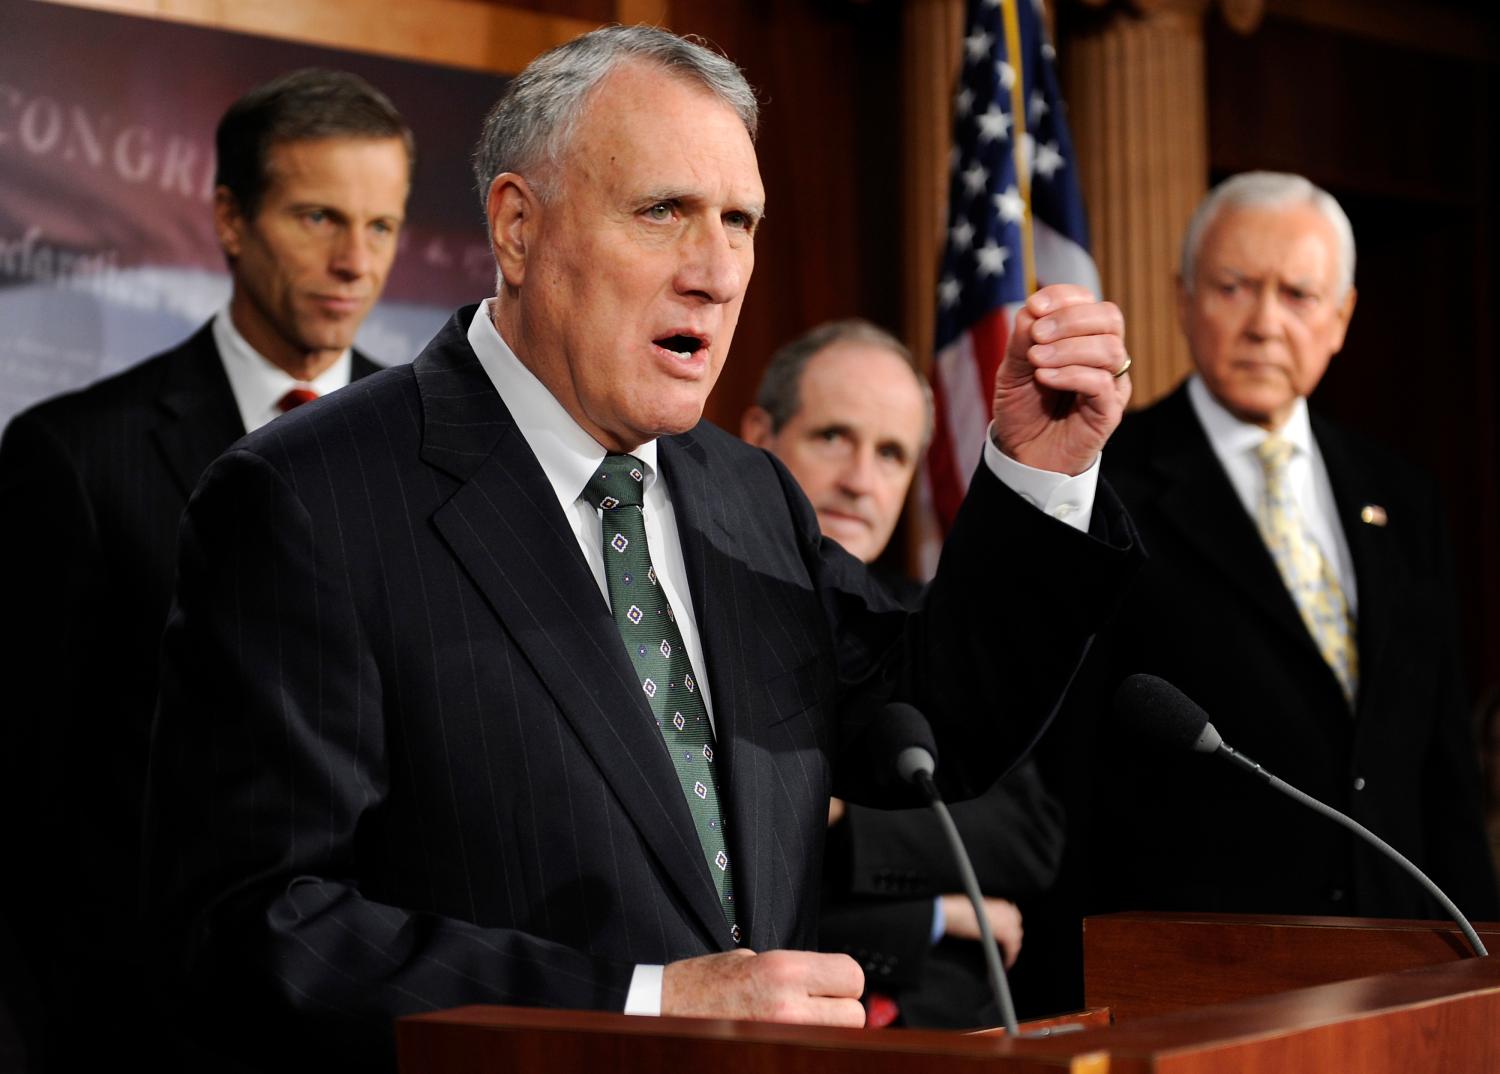 U.S. Senator Jon Kyl (R-AZ) (2nd L) speaks during a news conference about his opposition to moving forward on a vote to ratify the START treaty during the current lame duck session, at the U.S. Capitol in Washington, December 21, 2010. Also pictured are Senator John Thune (R-SD) (L), Senator James Risch (R-ID) (2nd R) and Senator Orrin Hatch (R-UT) (R).   REUTERS/Jonathan Ernst (UNITED STATES - Tags: POLITICS) - GM1E6CM03QN01